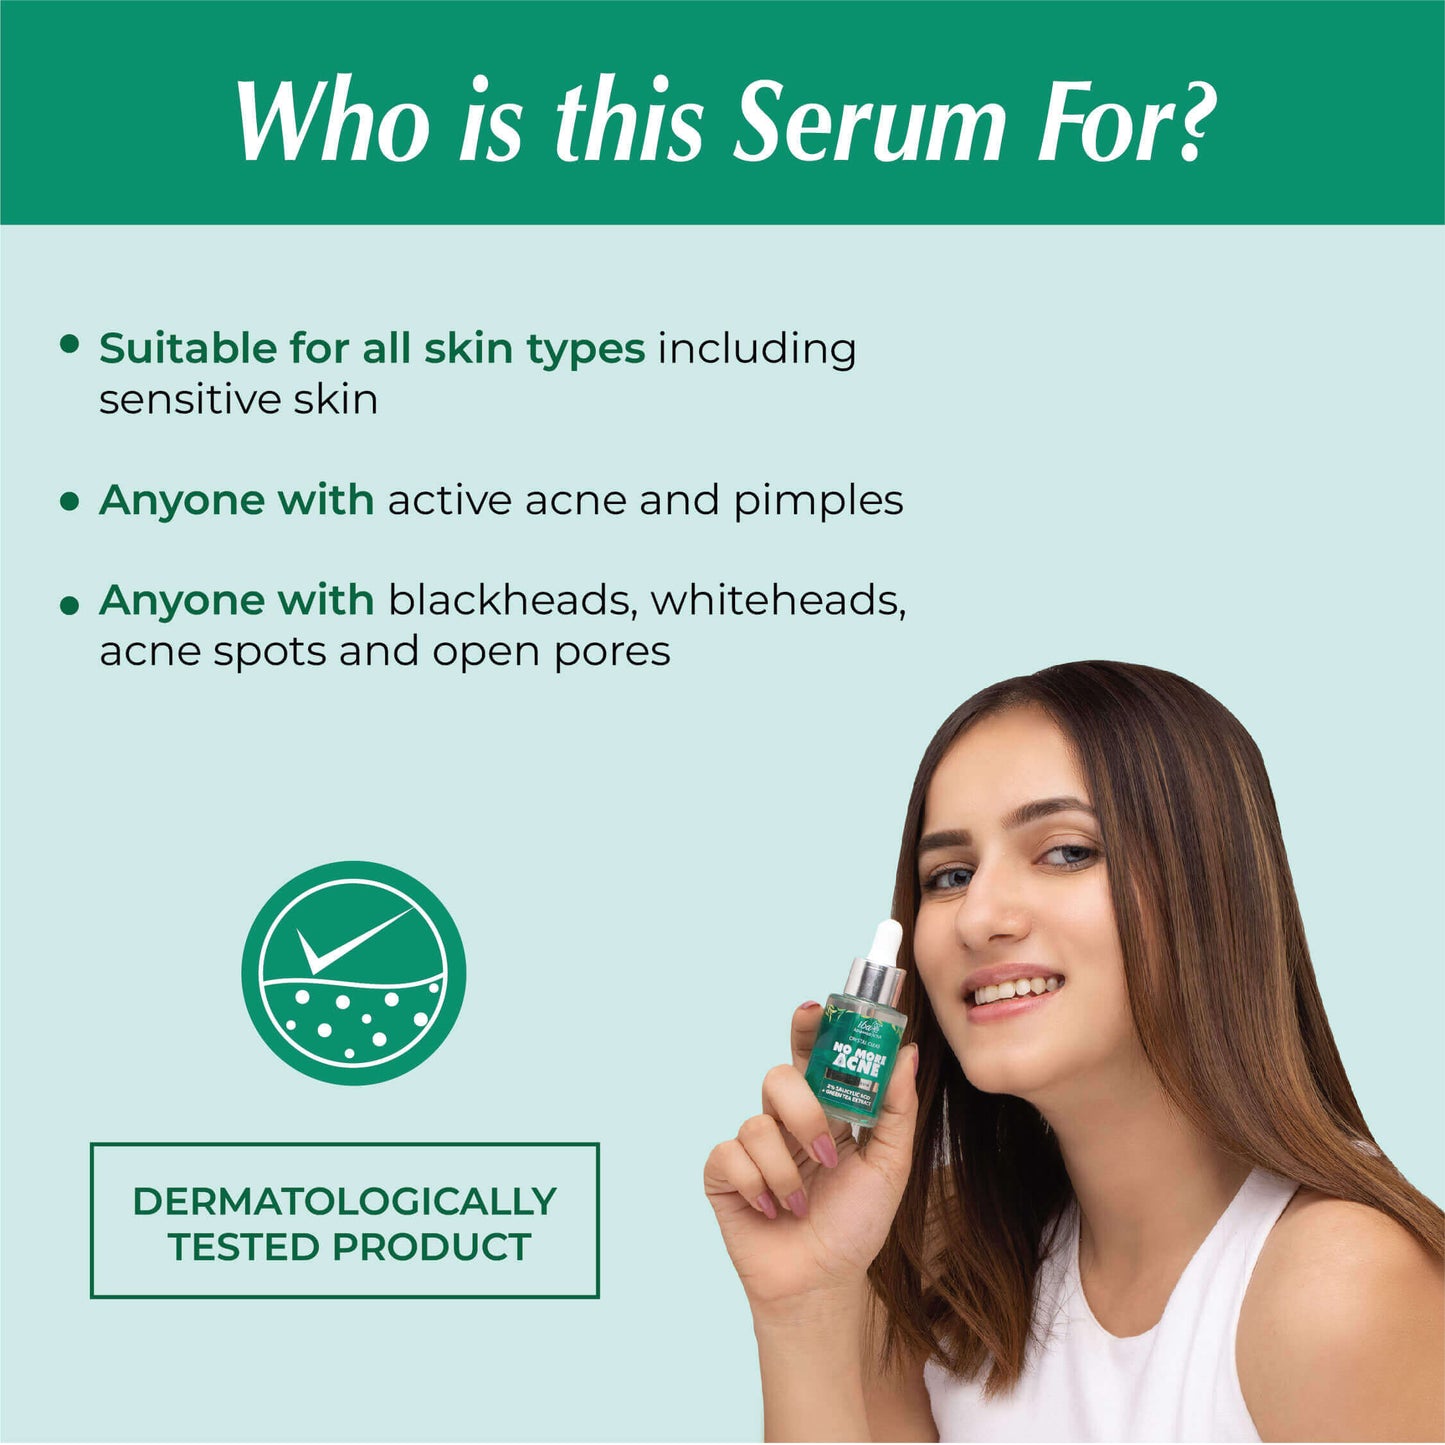 Who is this Serum For?